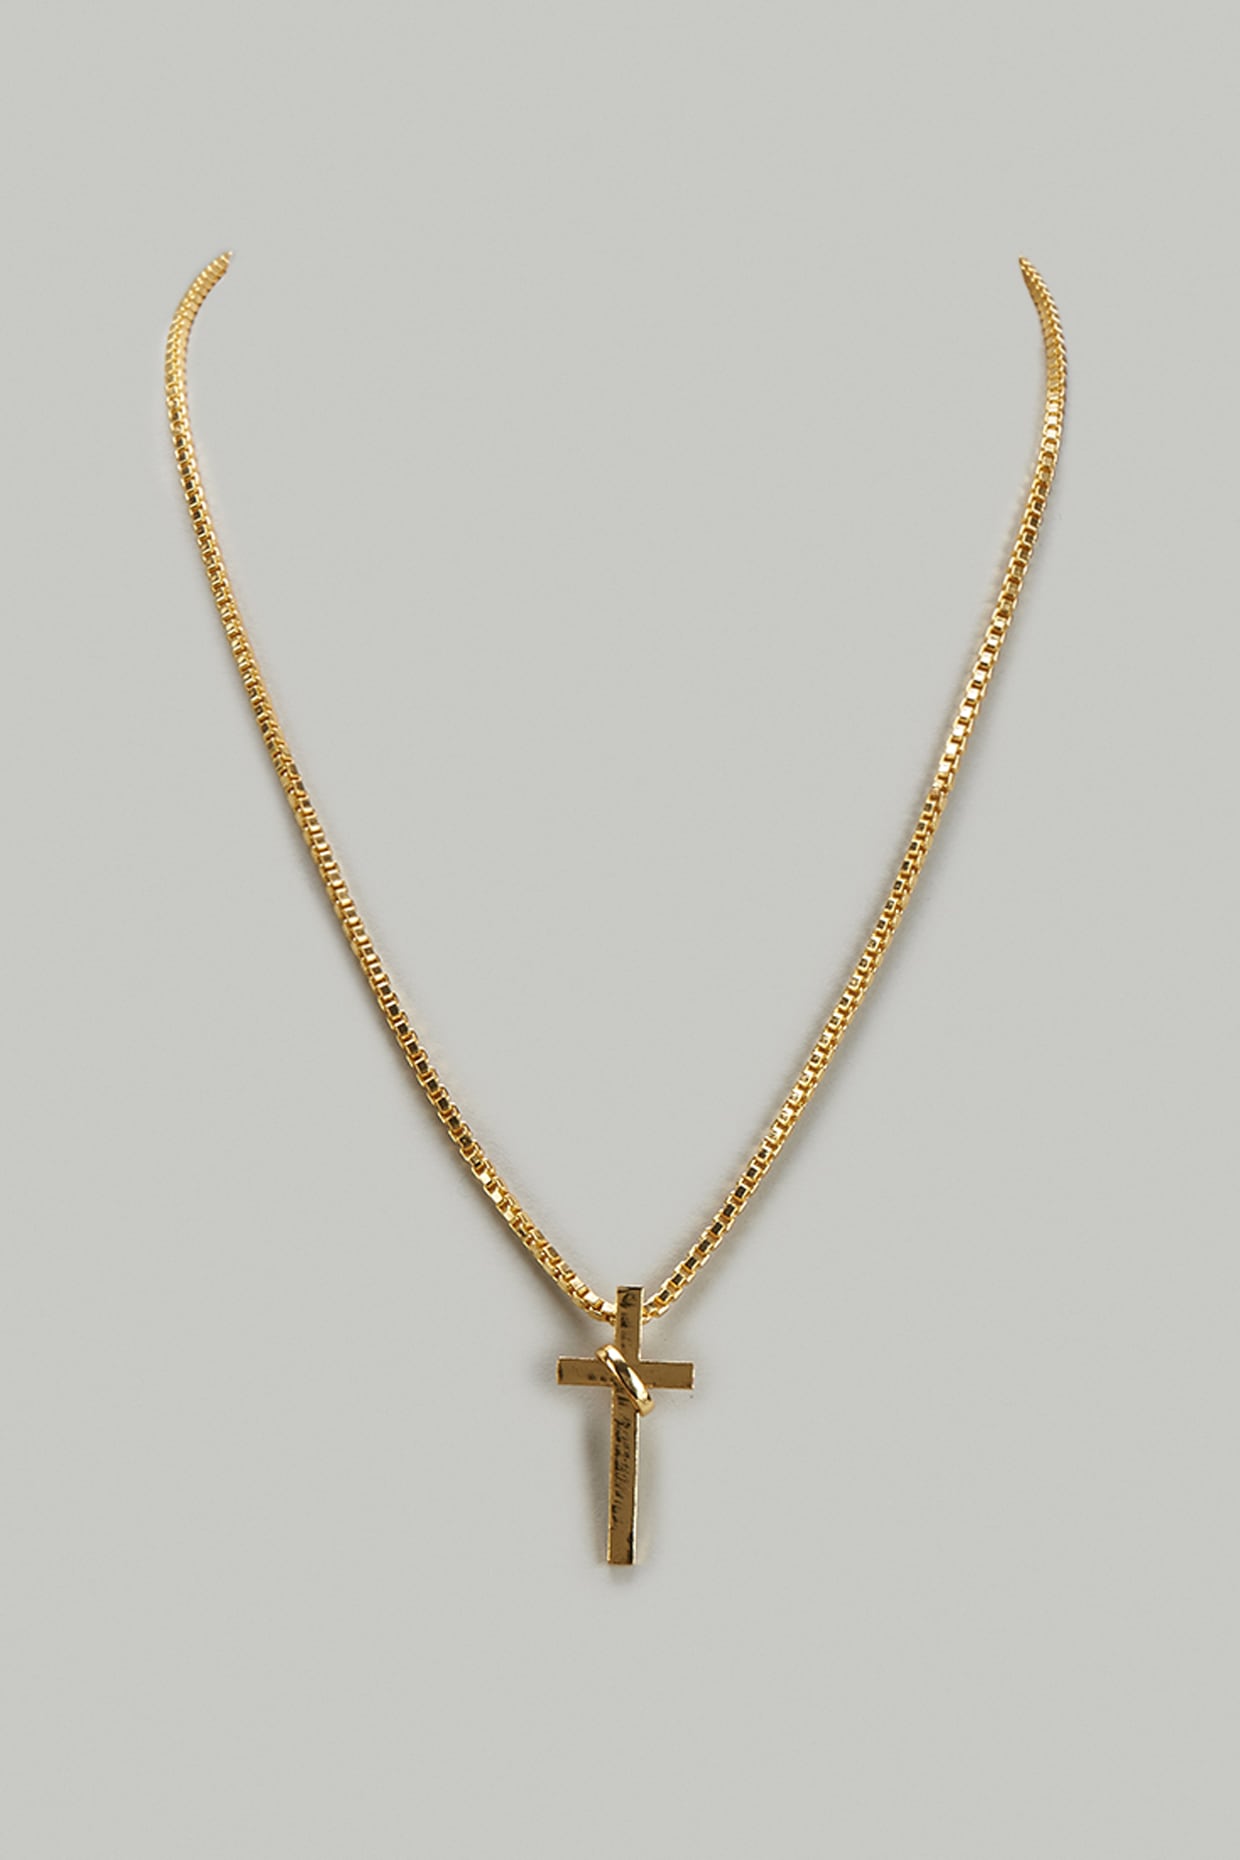 4 Inch Gold Plated Clergy Cross Necklace